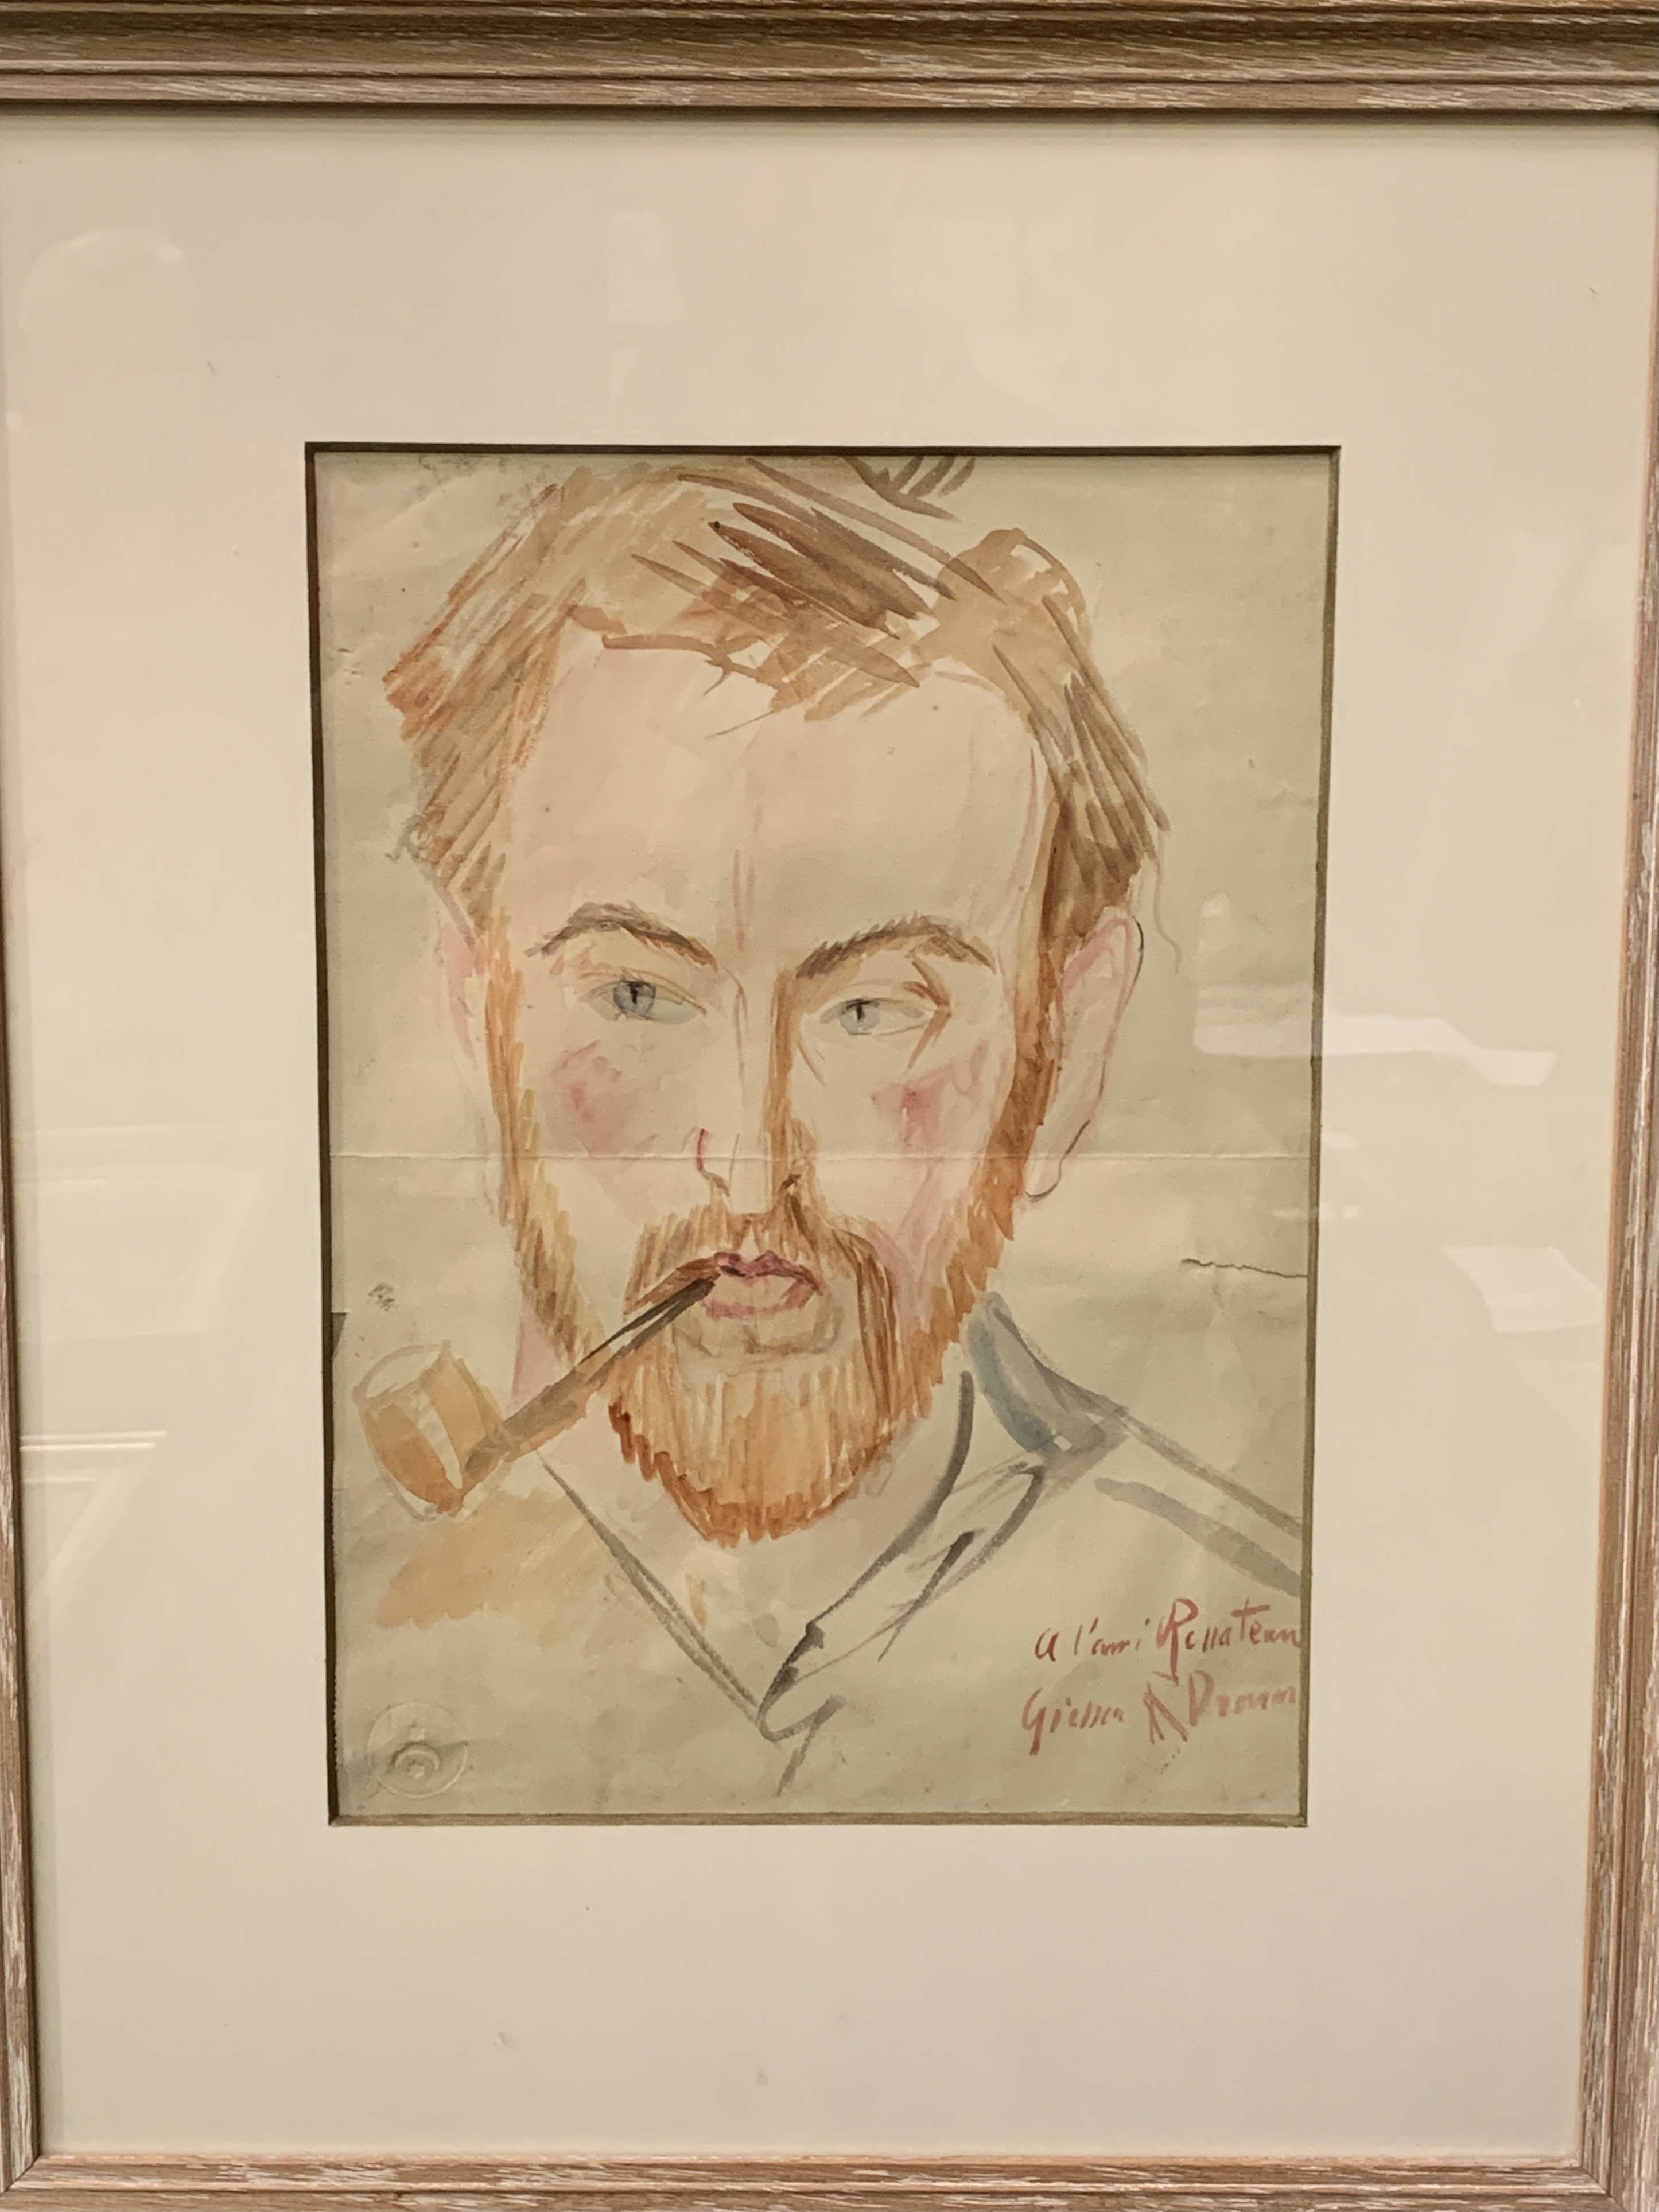 Framed and glazed watercolour portrait signed "A l'ami Renateau, Giessen, R Drouart" - Image 3 of 3